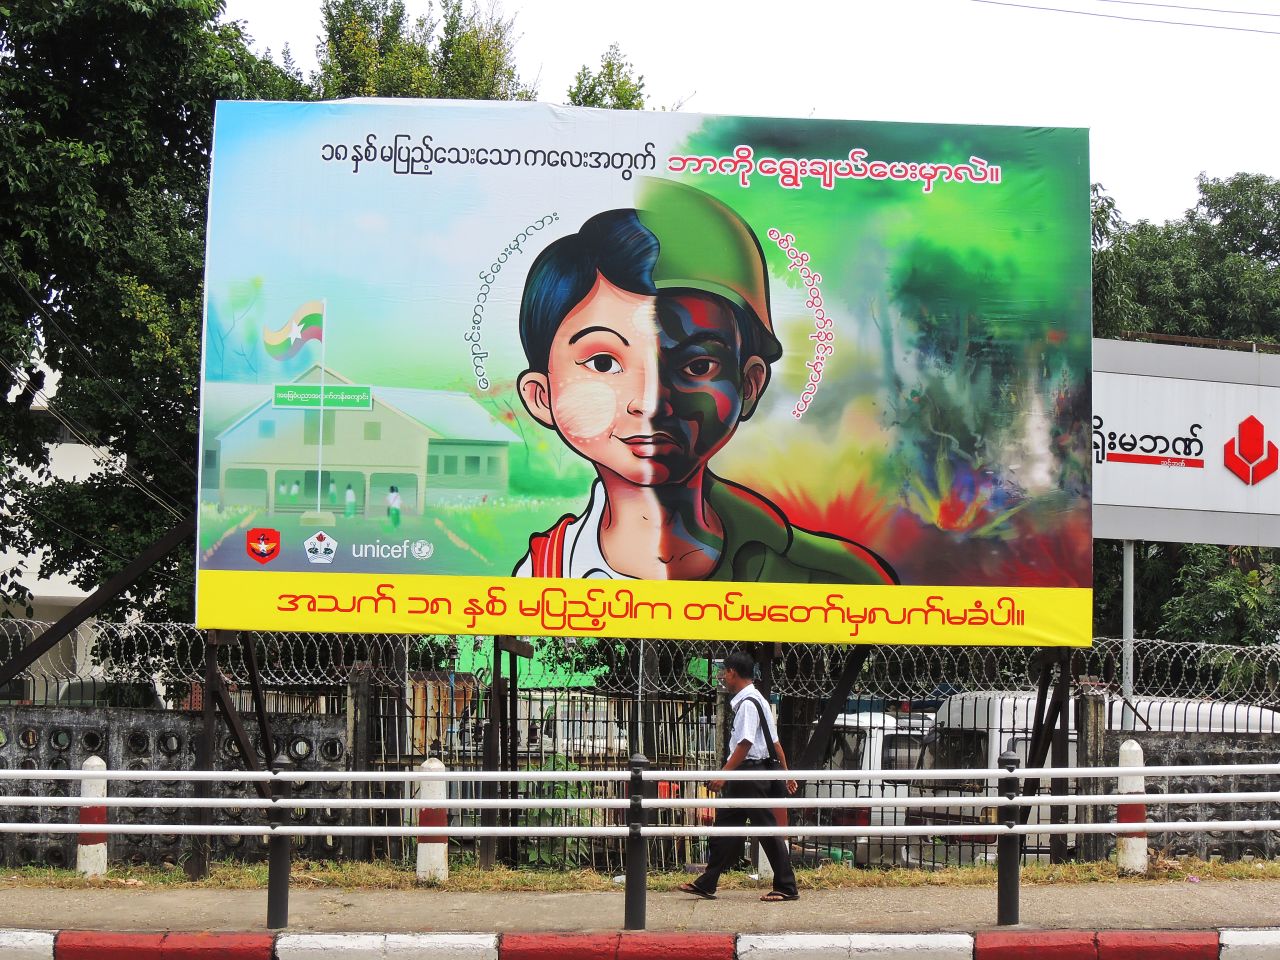 A sign recently erected in Yangon aims to raise awareness of the illegal recruitment of underage boys to the Burmese state military. It asks whether this boy should be in school or the army.